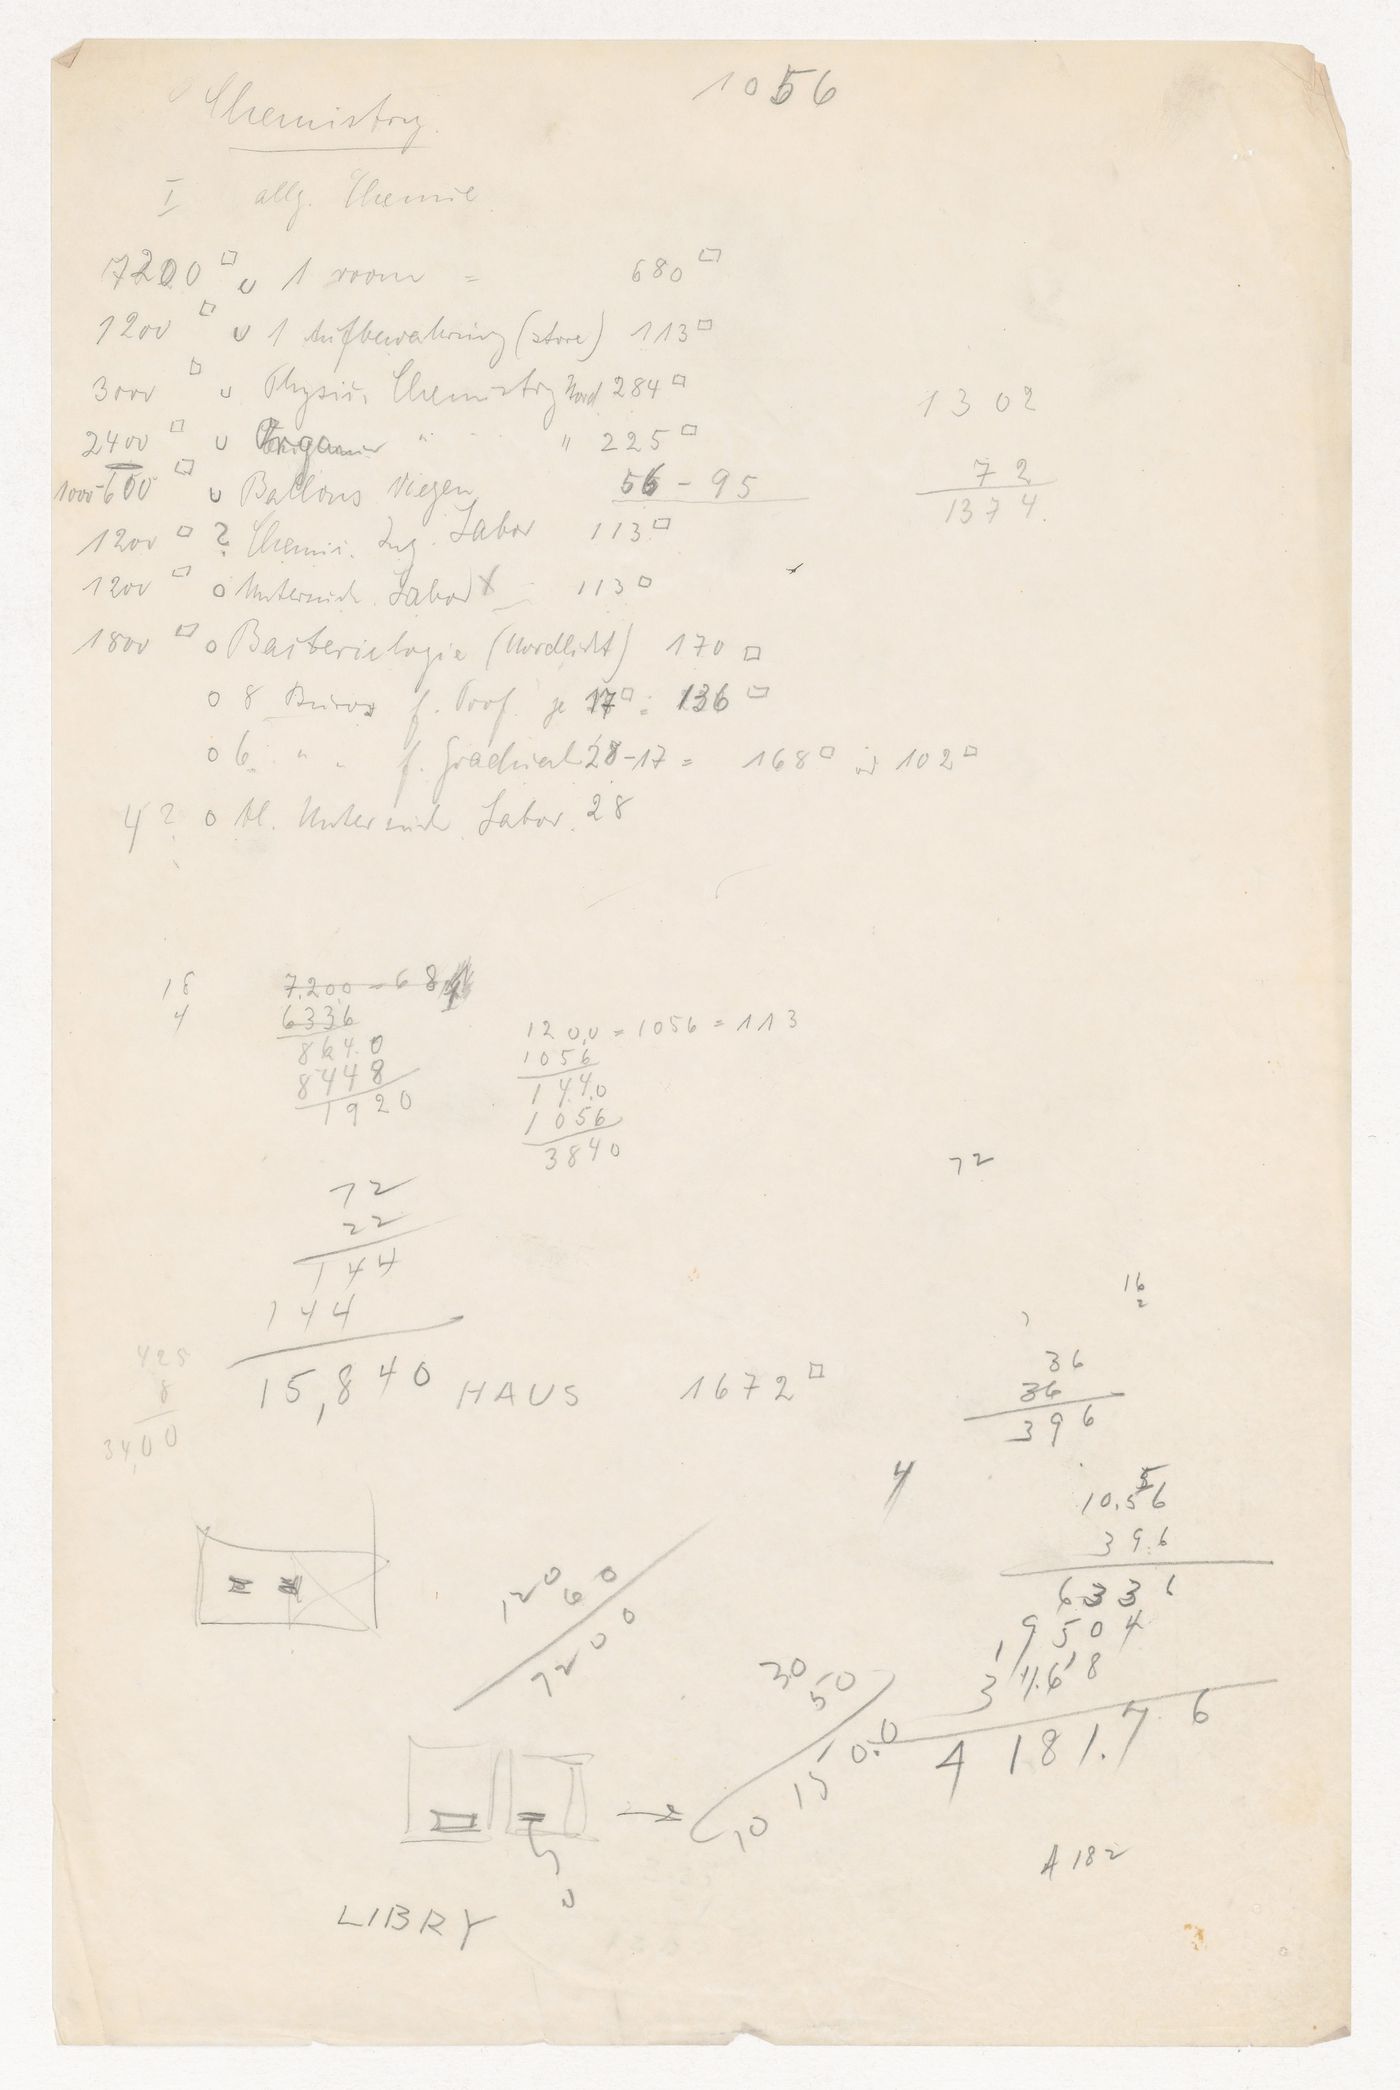 Calculations for Illinois Institute of Technology, probably for chemistry facilities